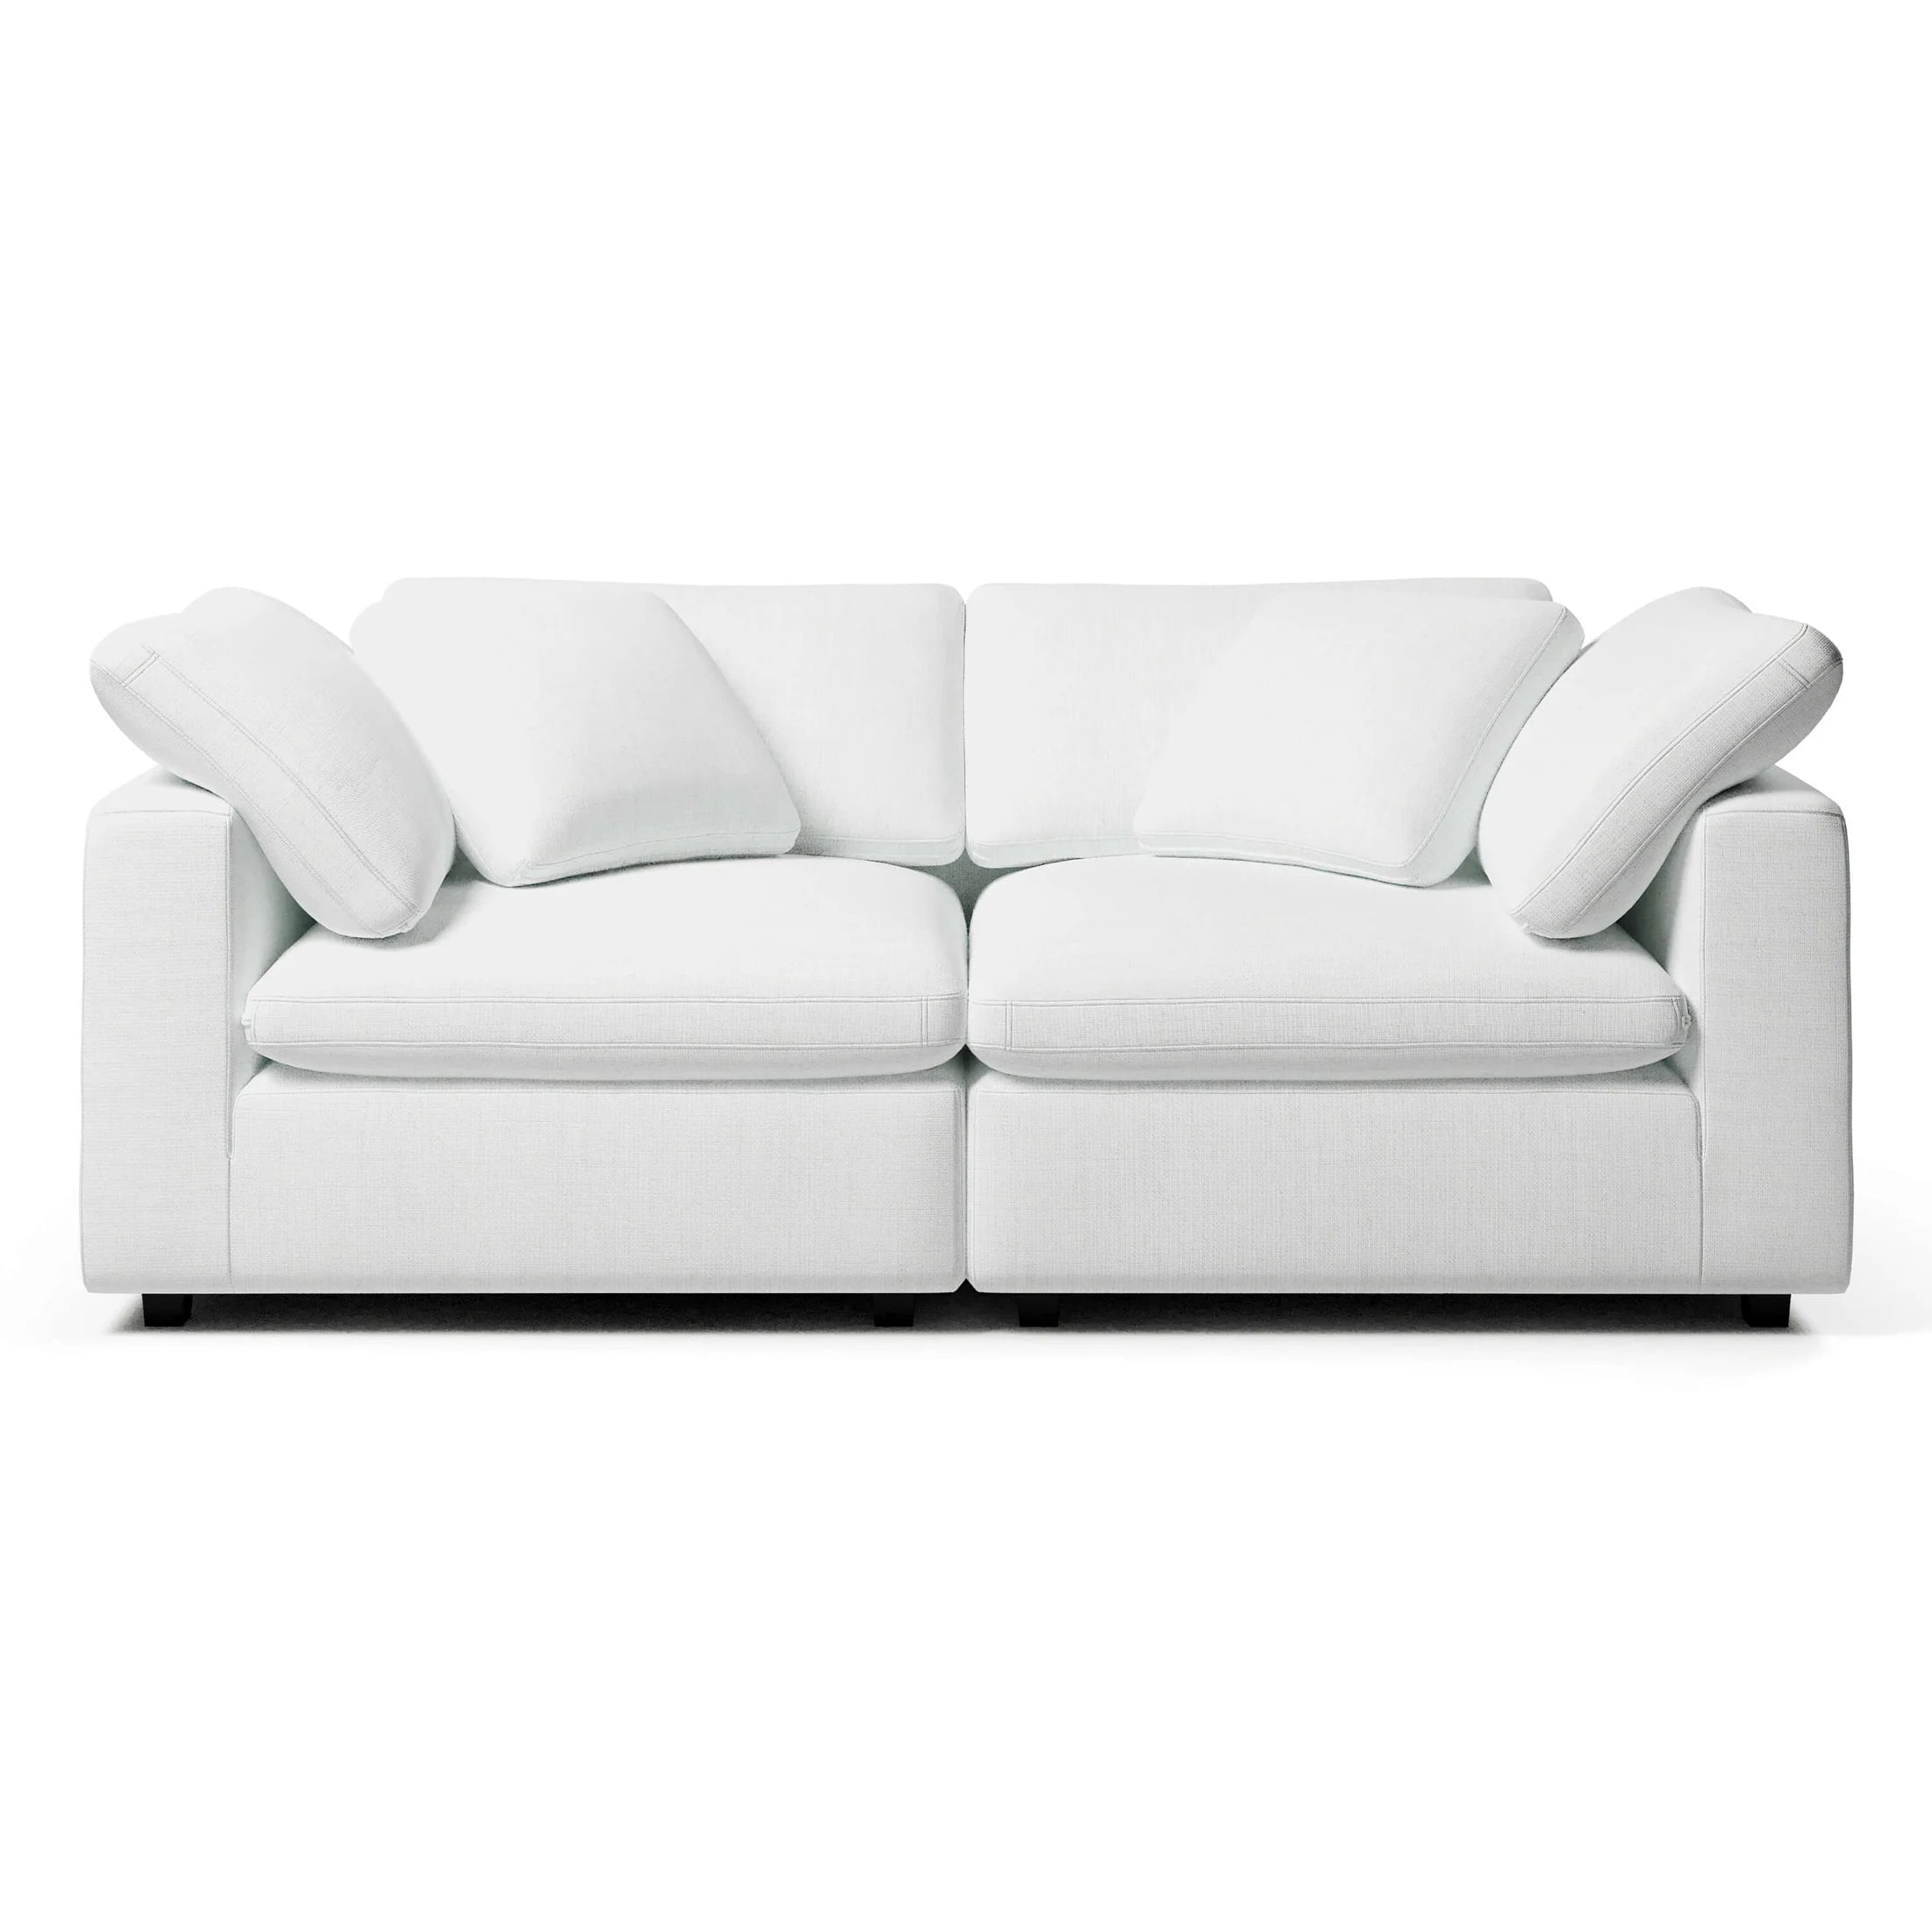 In Stock - Comfy Two Seater